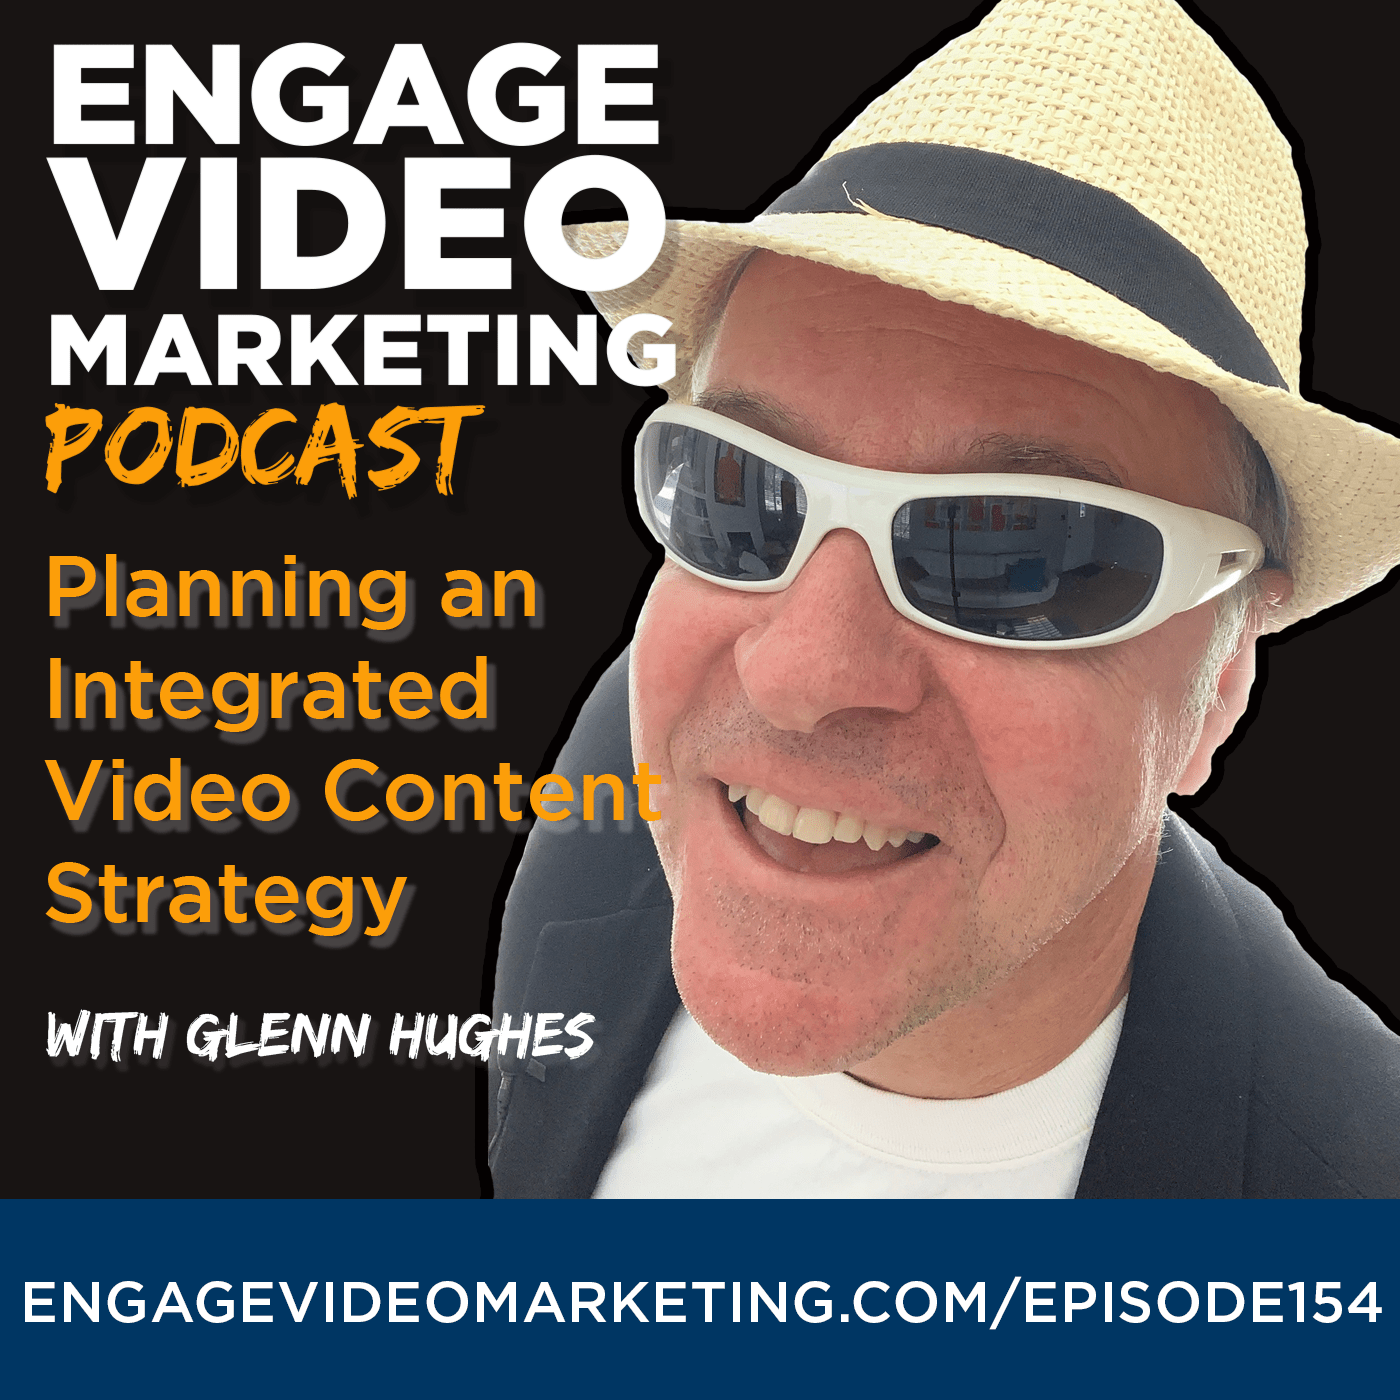 Planning an Integrated Video Content Strategy with Glenn Hughes